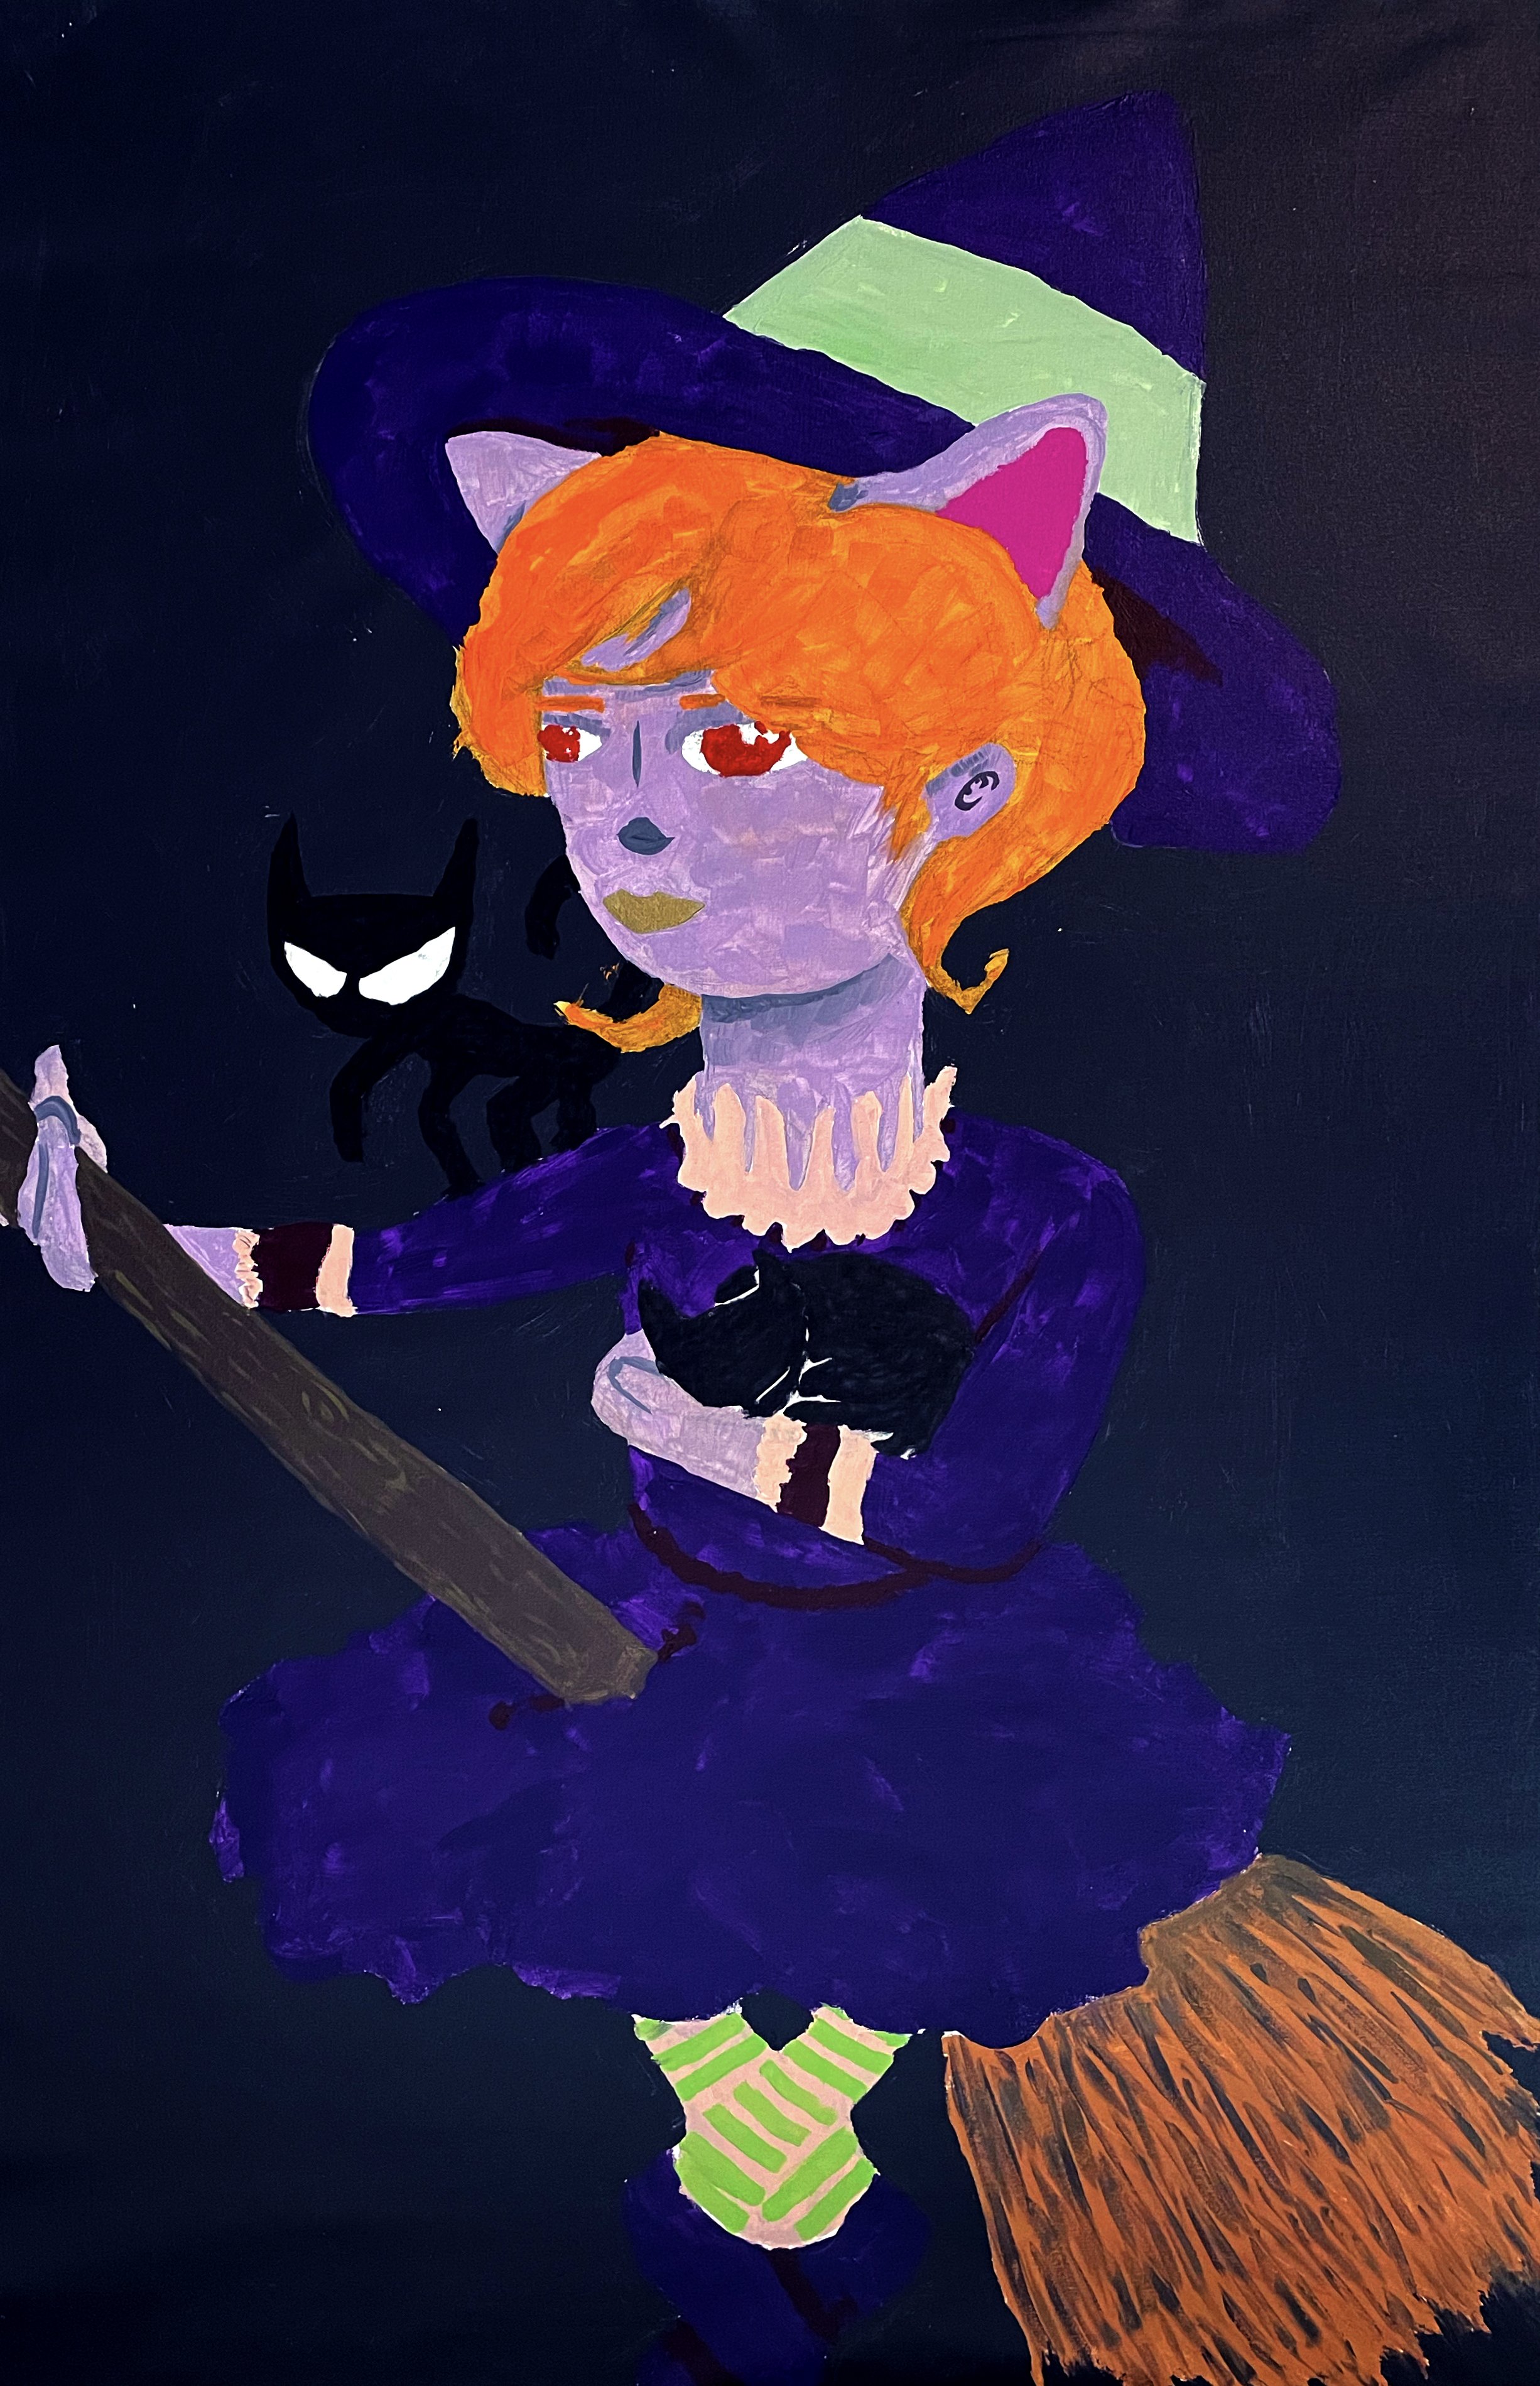   Witch In Cat Costume  acrylic on canvas. 2021  exhibited -  Crossing Arts Alliance during Costume Party 2021  